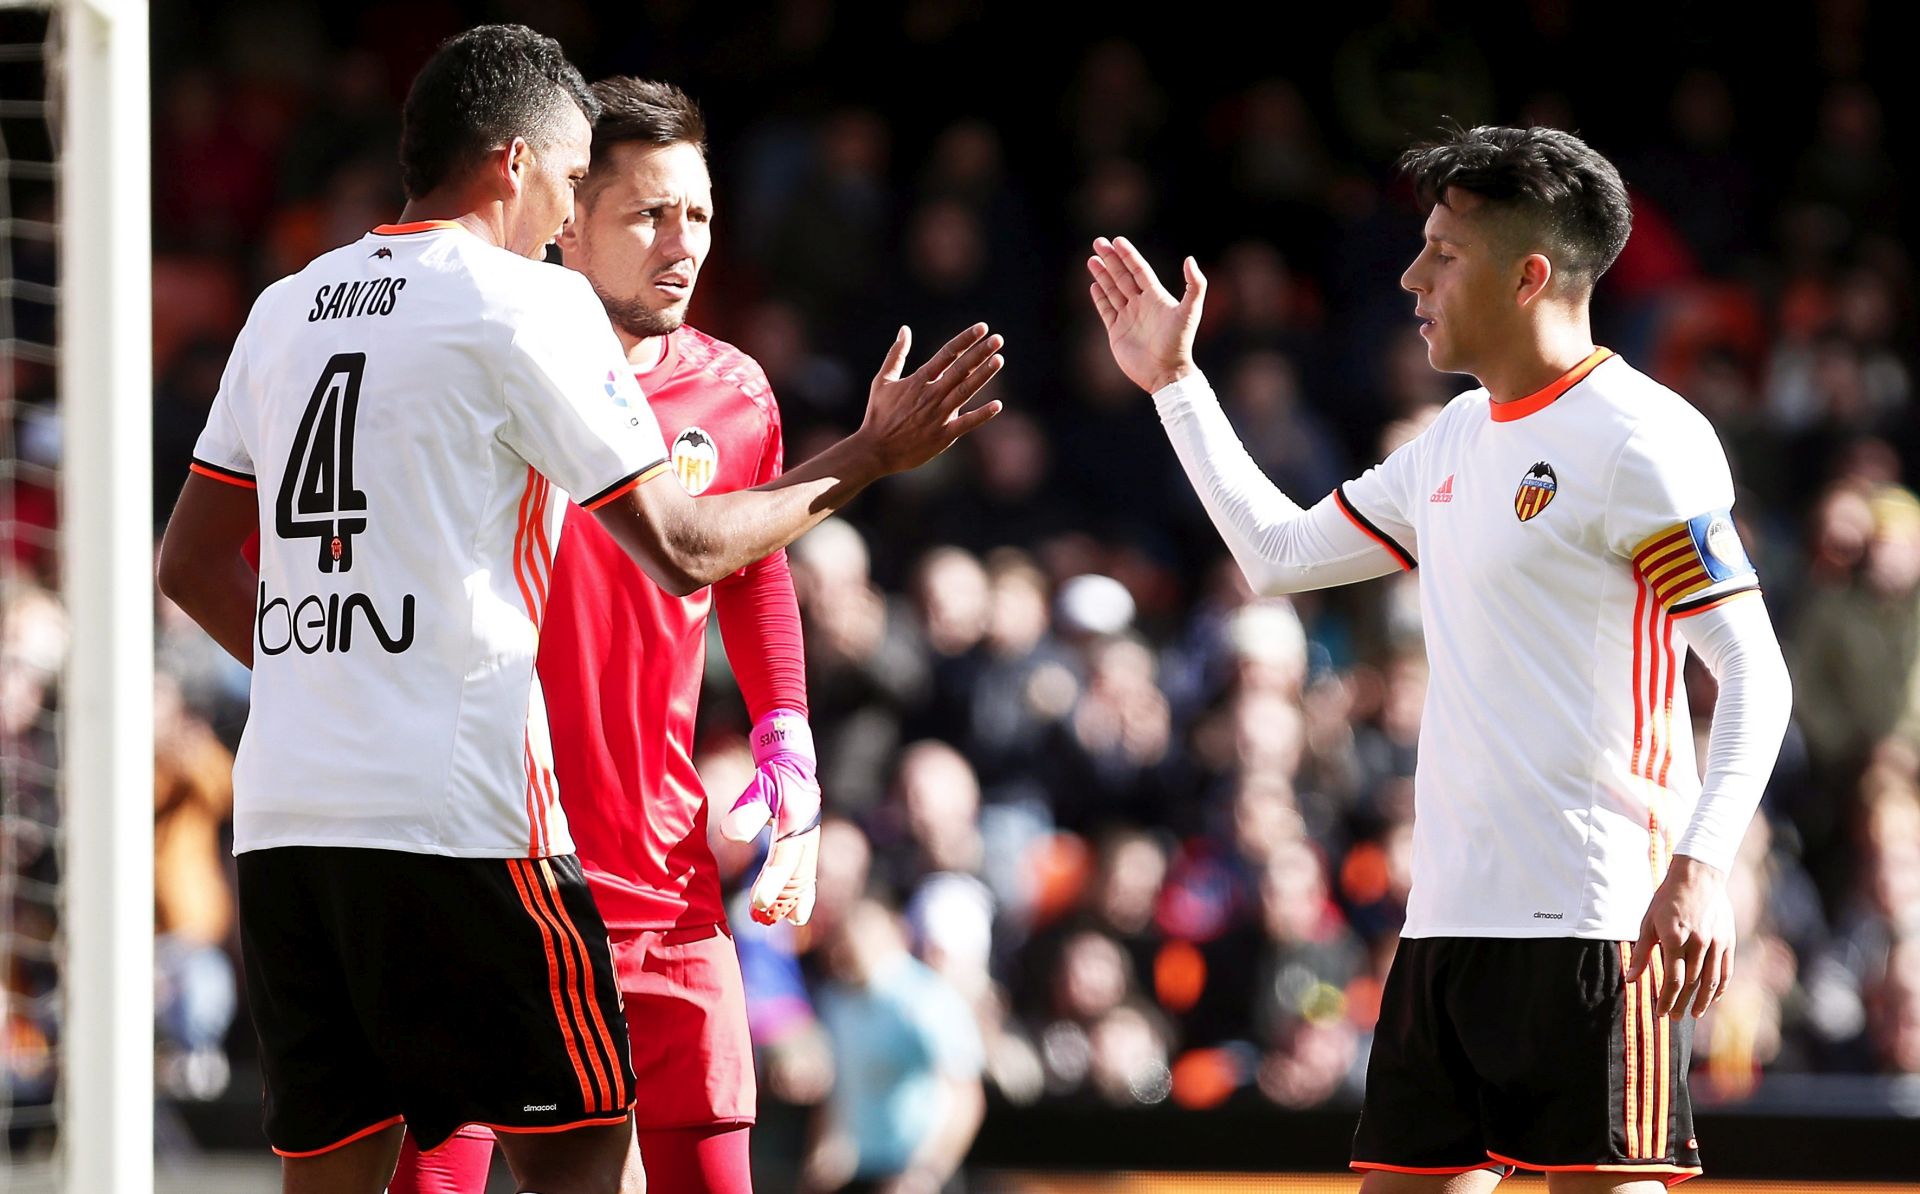 epa05718837 Valencia players (L-R) Aderlan Santos, goalkeeper Diego Alves, and Enzo Perez celebrate during the Spanish Primera Division soccer match between Valencia CF and RCD Espanyol at Mestalla stadium in Valencia, eastern Spain, 15 January 2017.  EPA/MIGUEL ANGEL POLO